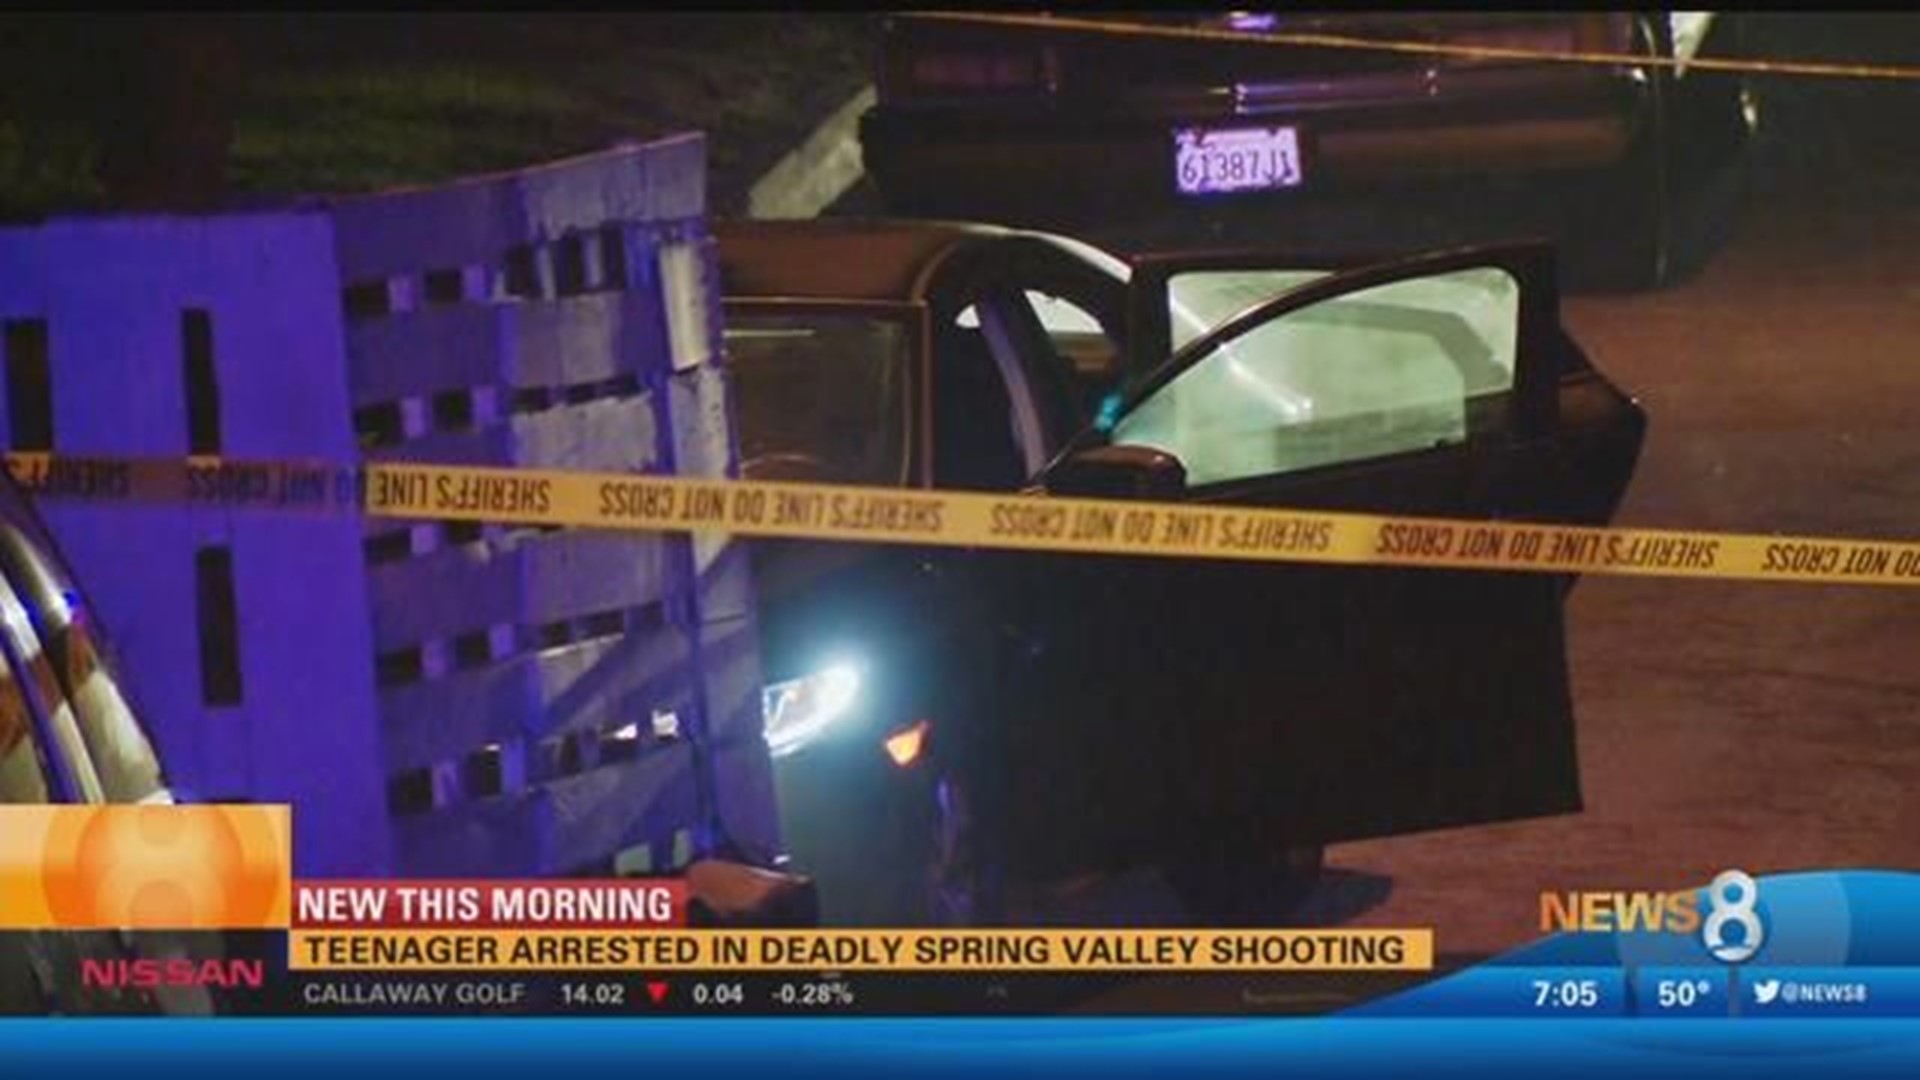 Second arrest made in deadly Spring Valley shooting